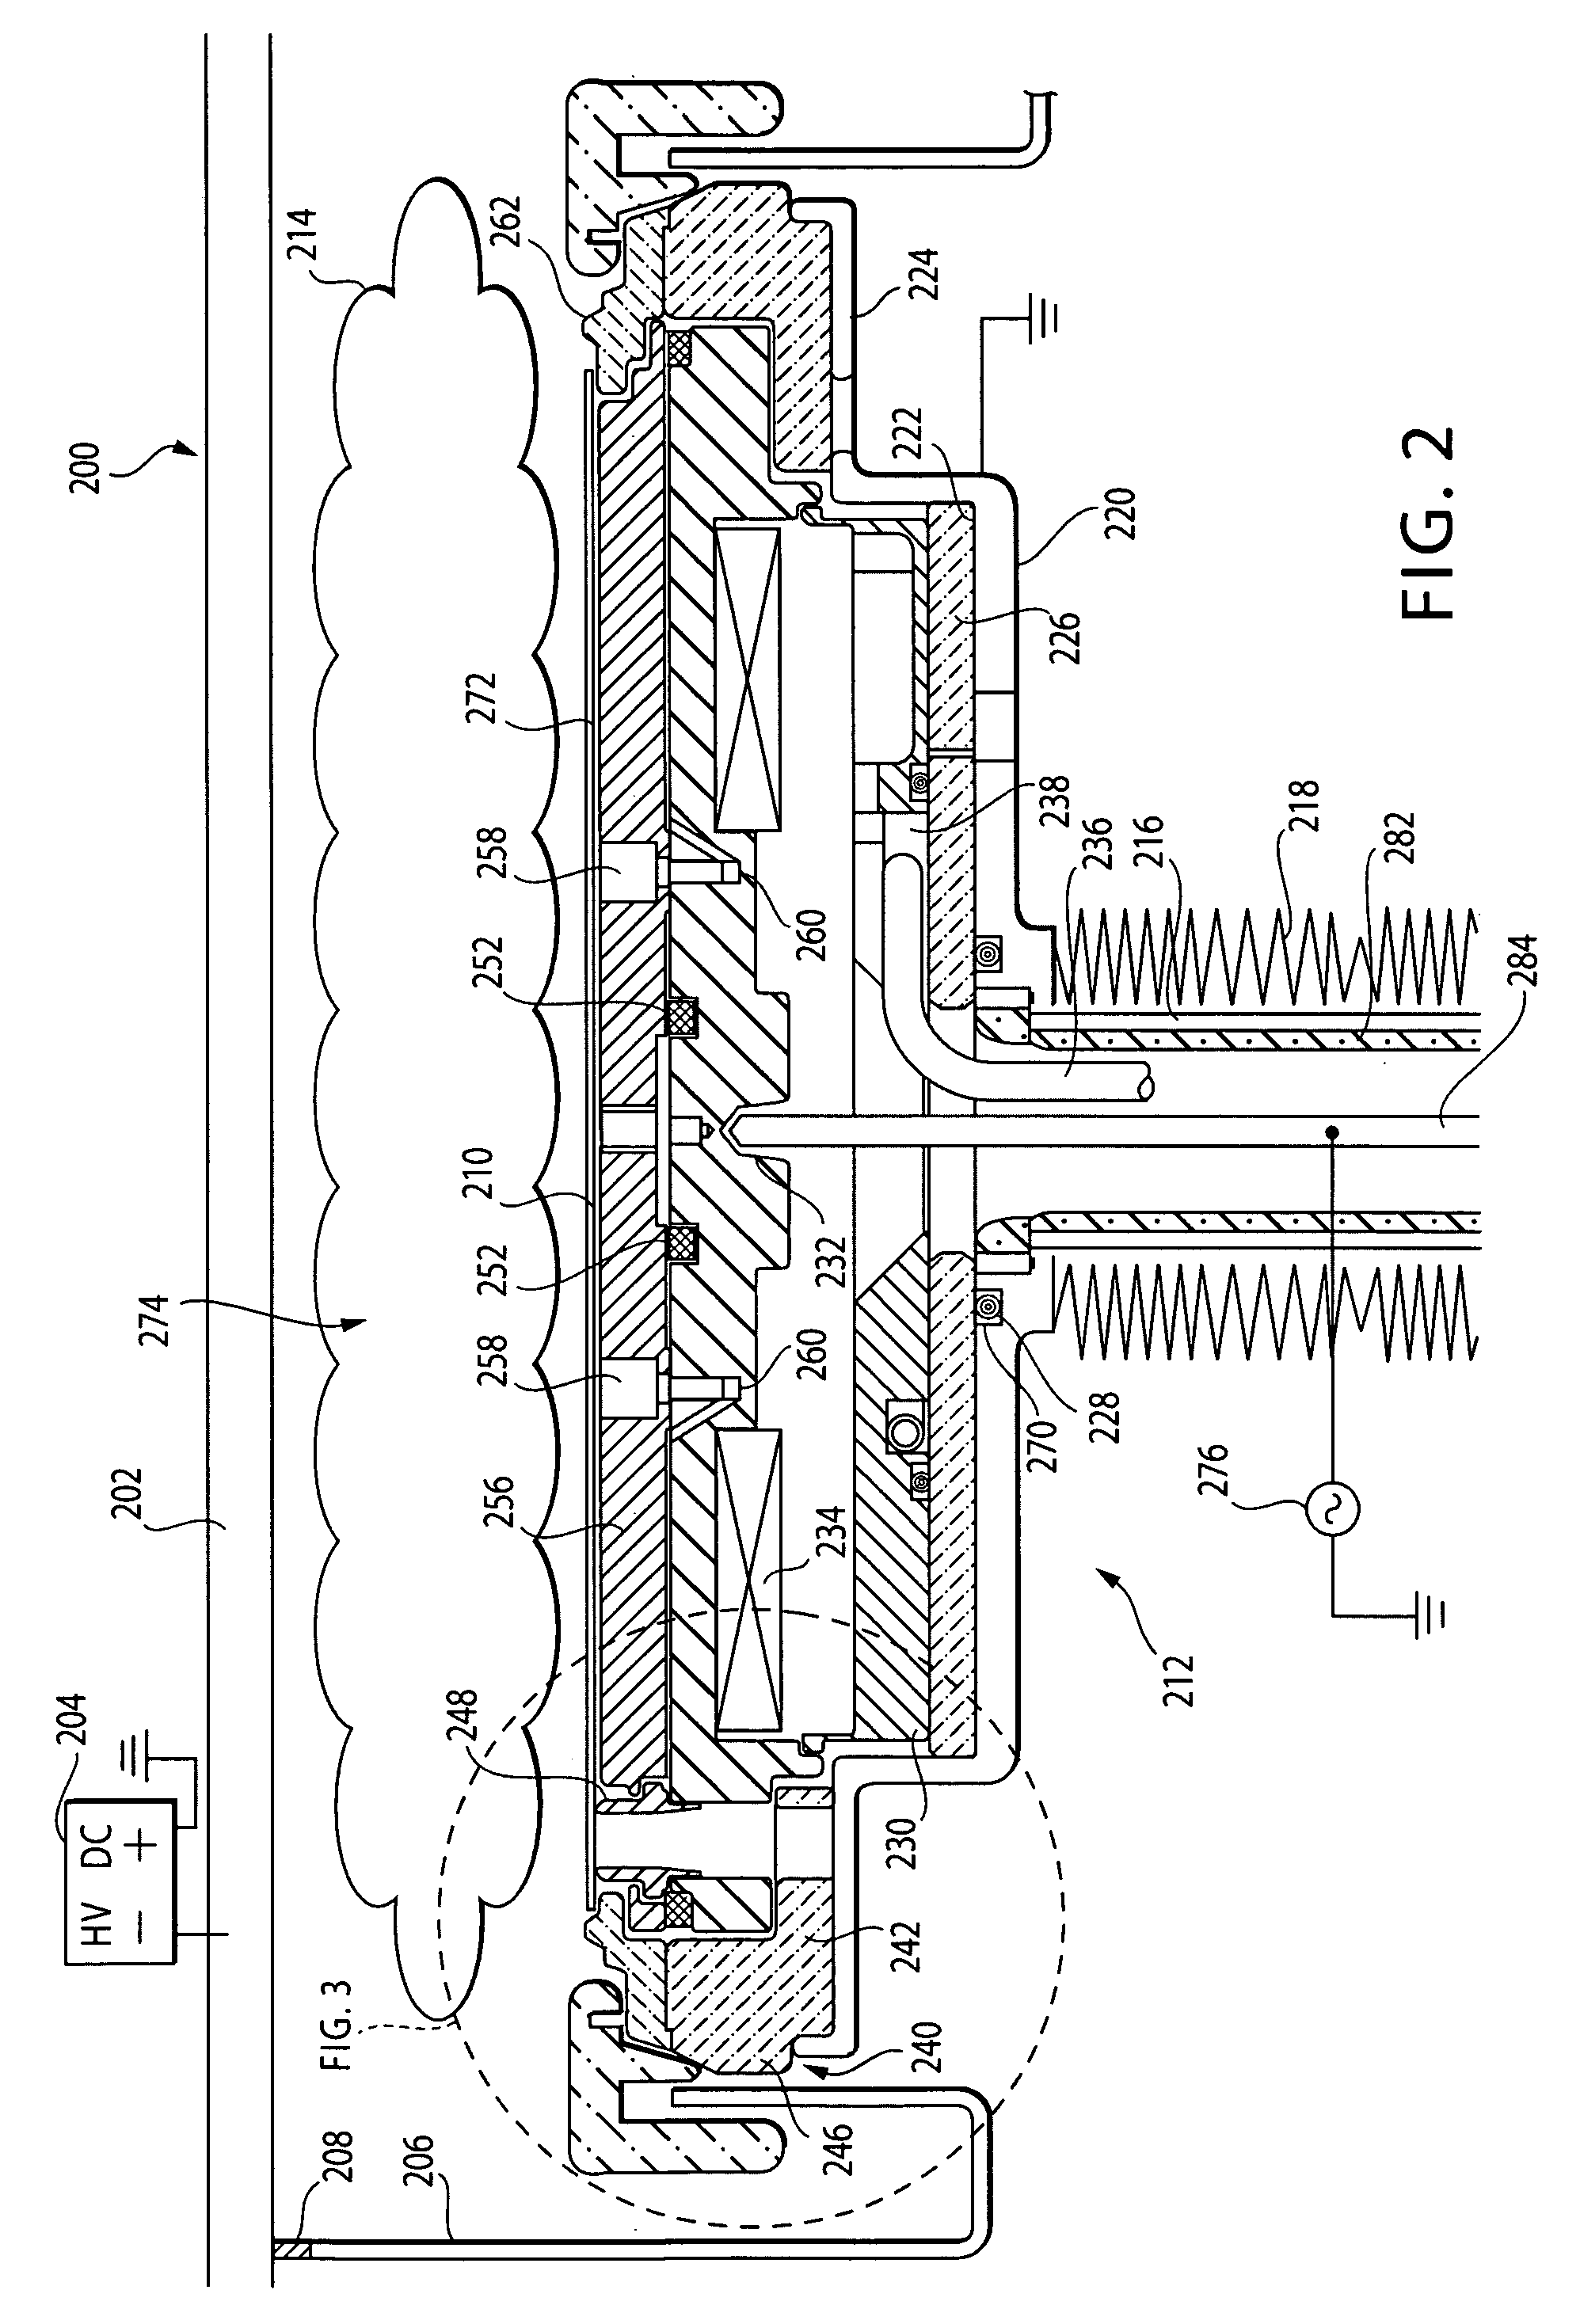 Process kit for improved power coupling through a workpiece in a semiconductor wafer processing system